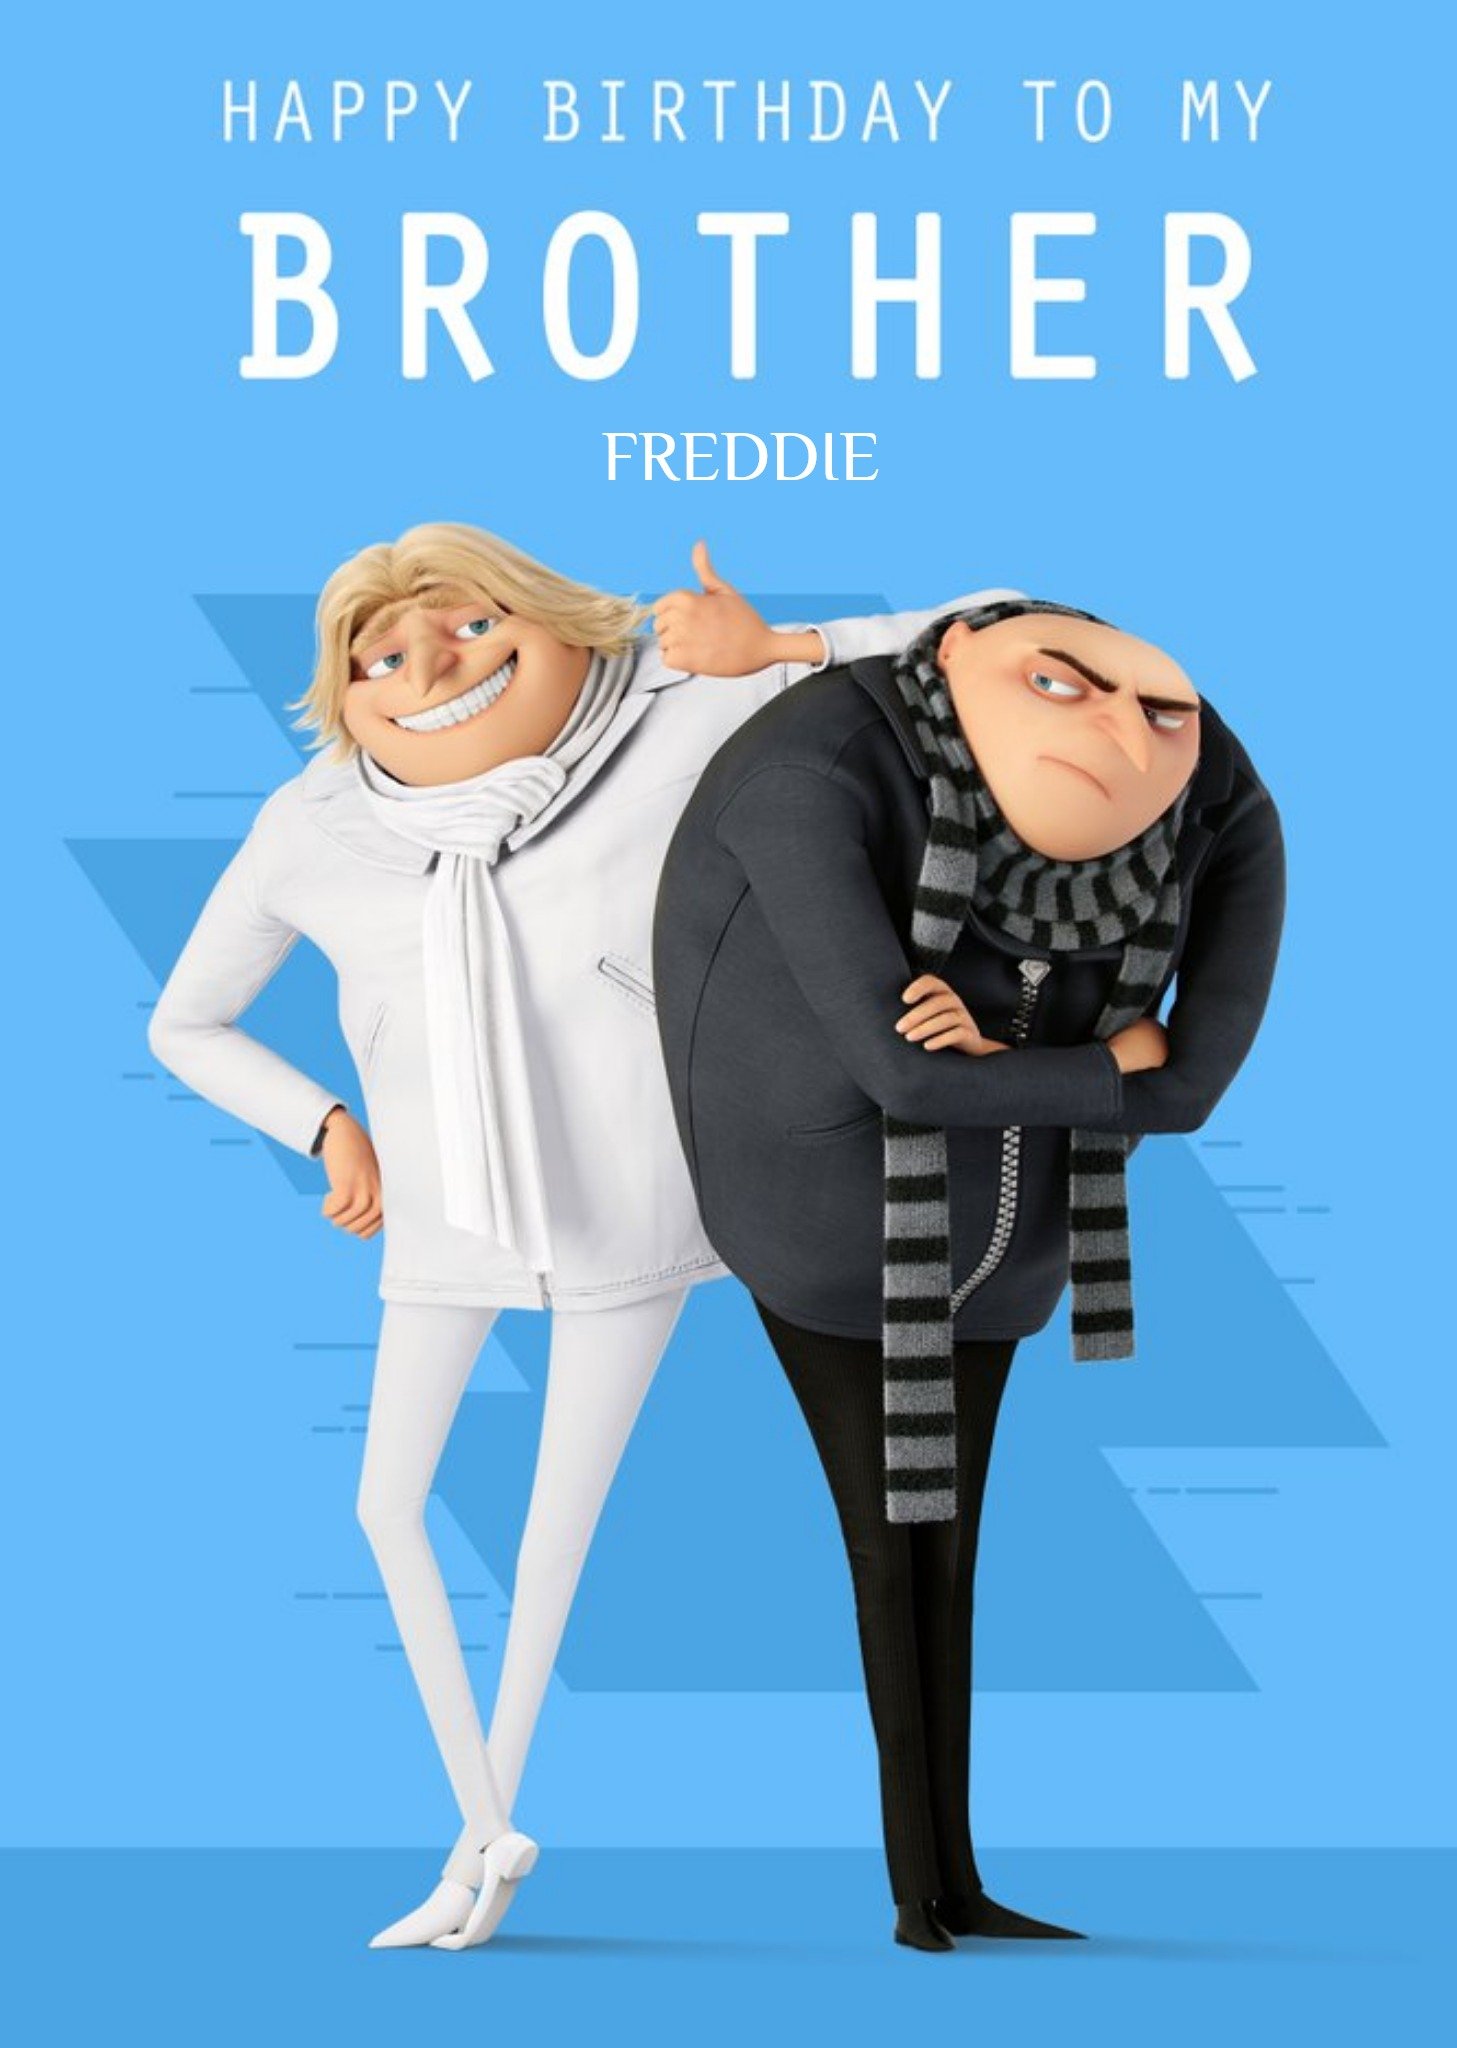 Brother Birthday Cards - Despicable Me - Funny, Large